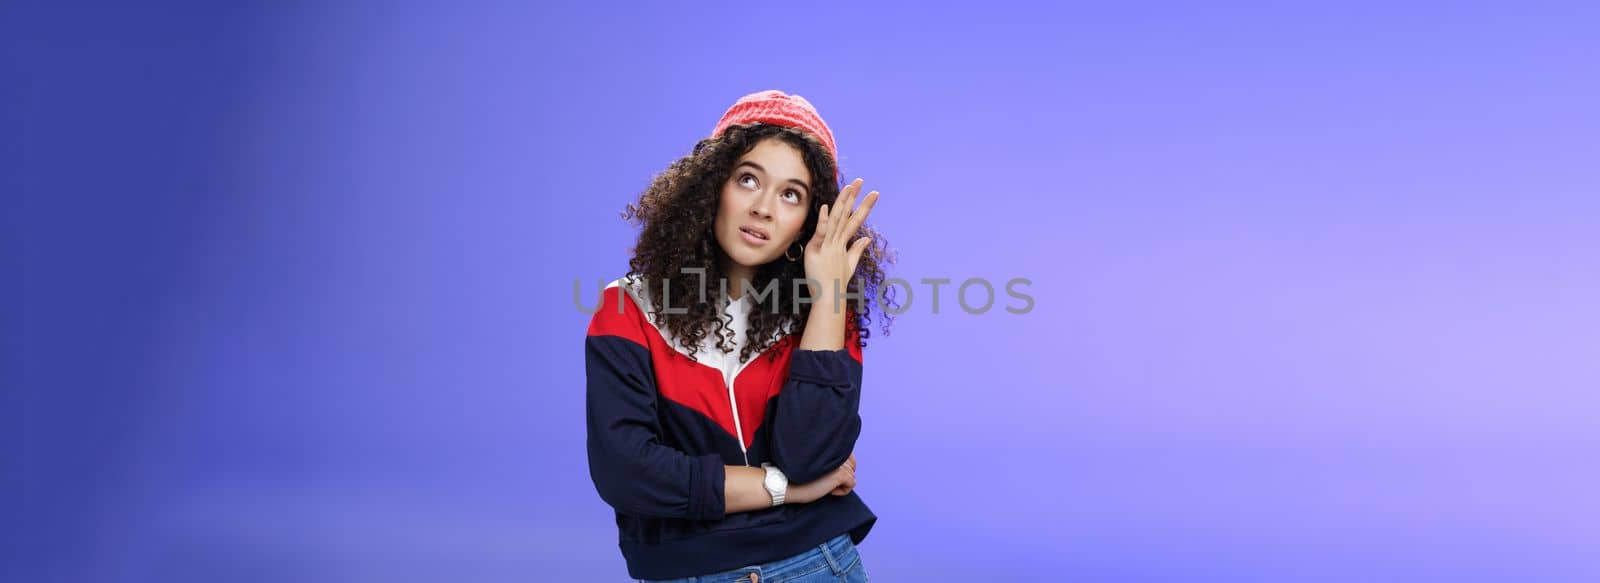 Waist-up shot of bored and annoyed assertive arrogant cool girl in streetstyle outfit rolling eyes up making facepalm and grimacing from irritation and disappointment, posing against blue background.